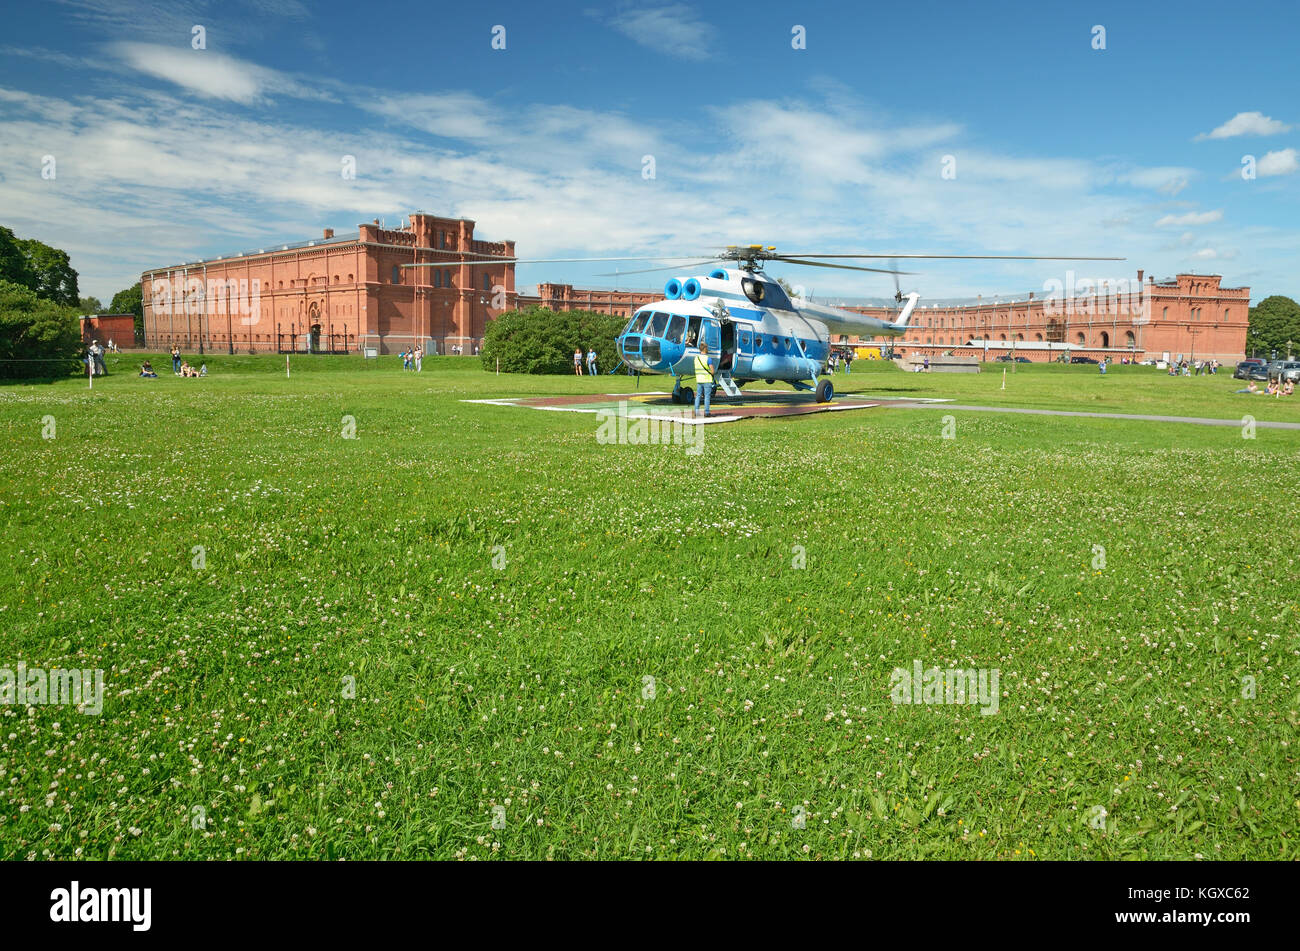 The urban landscape in summer with a takeoff area for helicopters Stock Photo